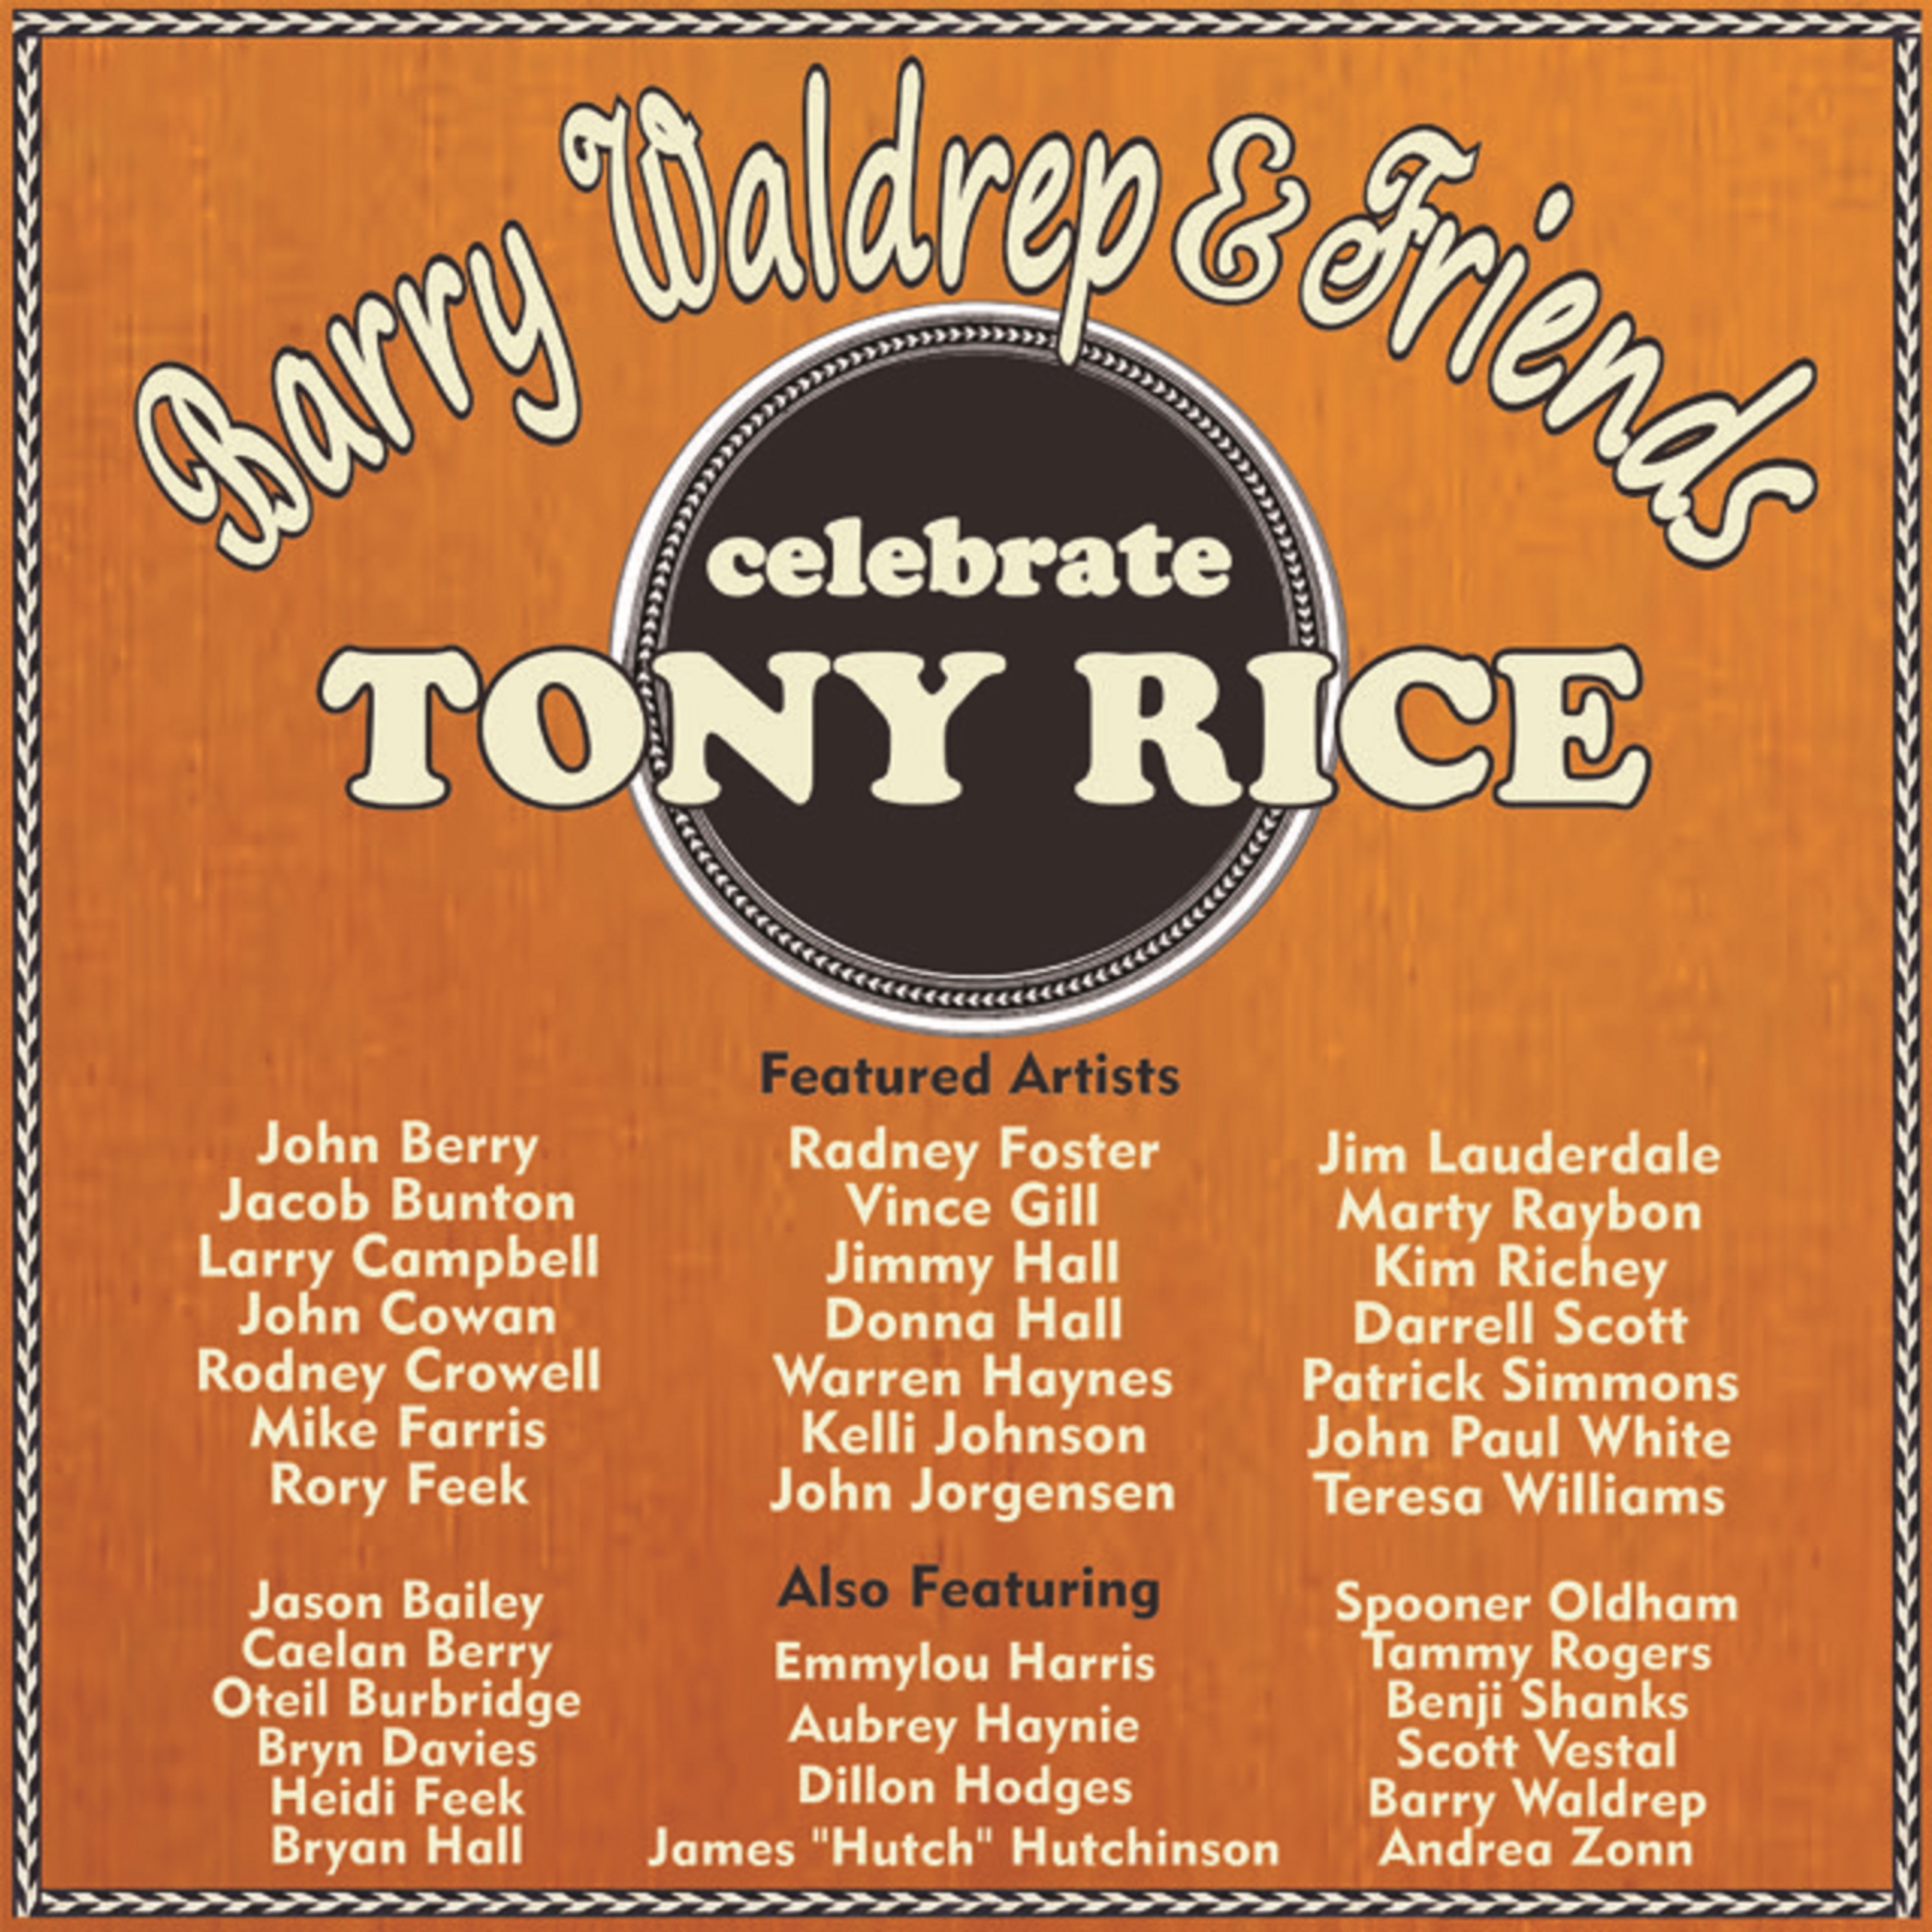 Barry Waldrep and Friends Celebrate Tony Rice out Dec. 24th